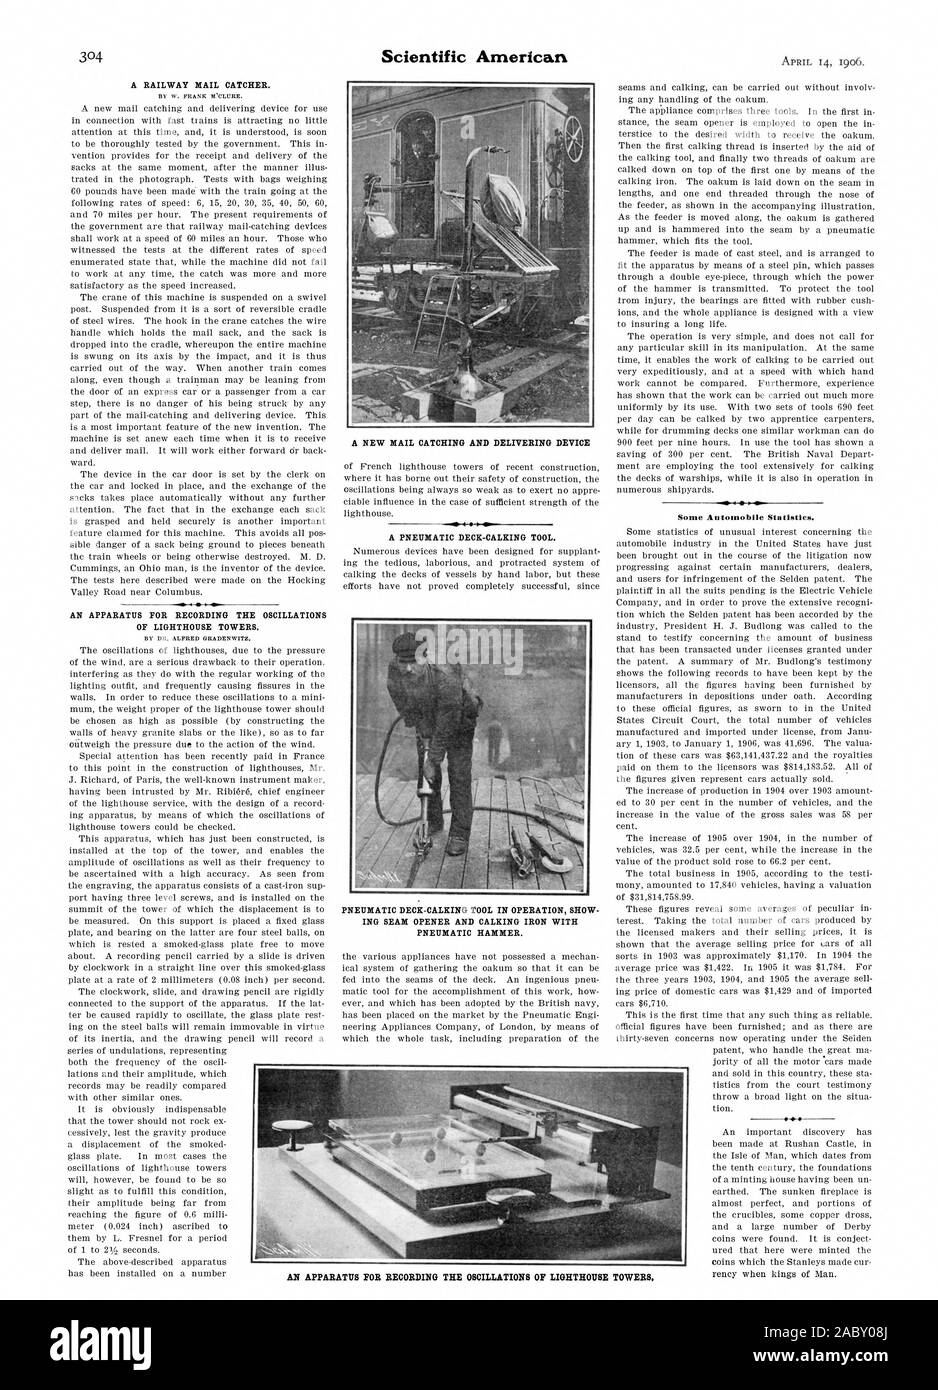 A RAILWAY MAIL CATCHER. AN APPARATUS FOR RECORDING THE OSCILLATIONS OF LIGHTHOUSE TOWERS. A NEW MAIL CATCHING AND DELIVERING DEVICE A PNEUMATIC DECK-CALKING TOOL. PNEUMATIC DECK-CALKING TOOL IN OPERATION SHOW ING SEAM OPENER AND CALKING IRON WITH PNEUMATIC HAMMER. Some Automobile Statistics. AN APPARATUS FOR RECORDING THE OSCILLATIONS OF LIGHTHOUSE TOWERS., scientific american, 1906-04-14 Stock Photo